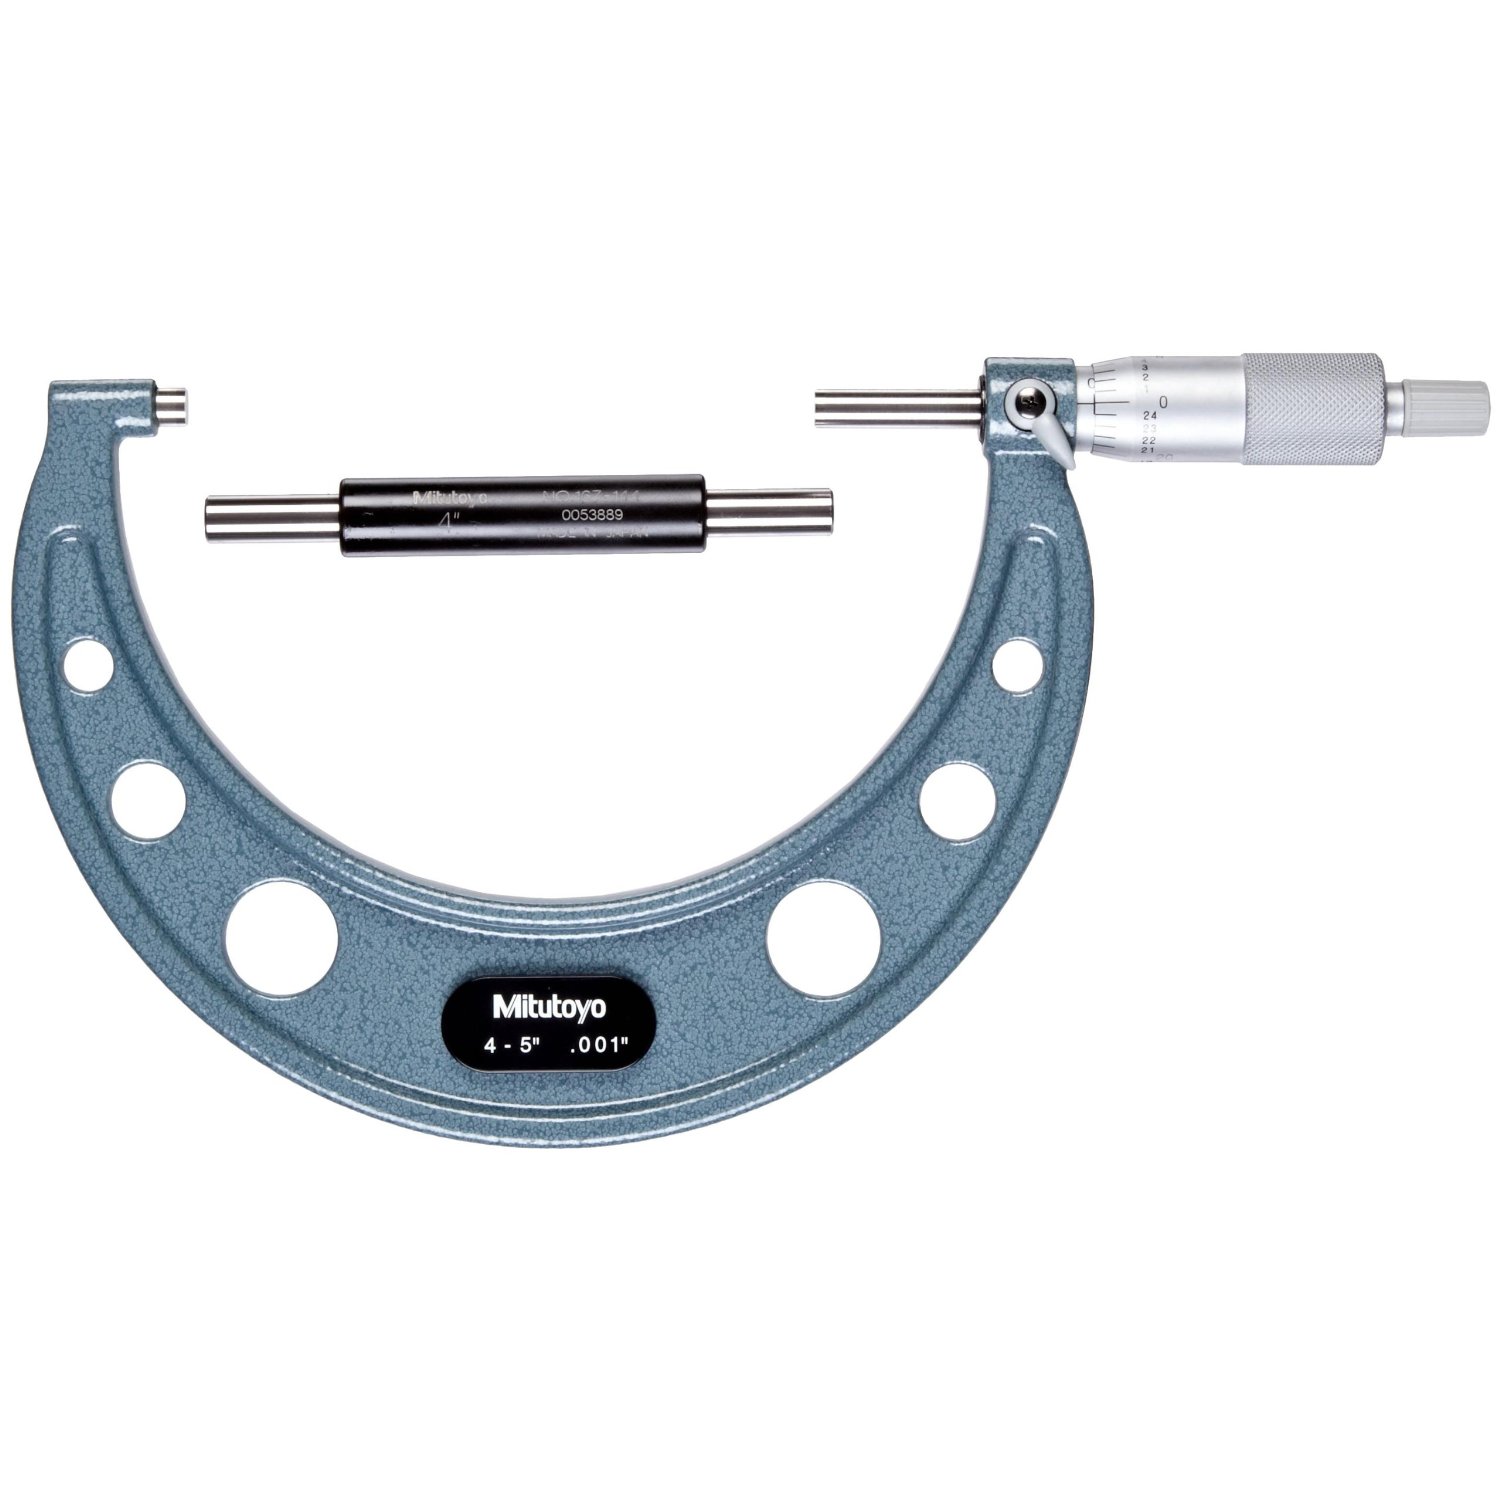 Mitutoyo 103-181 Outside Micrometer 4-5/0.001